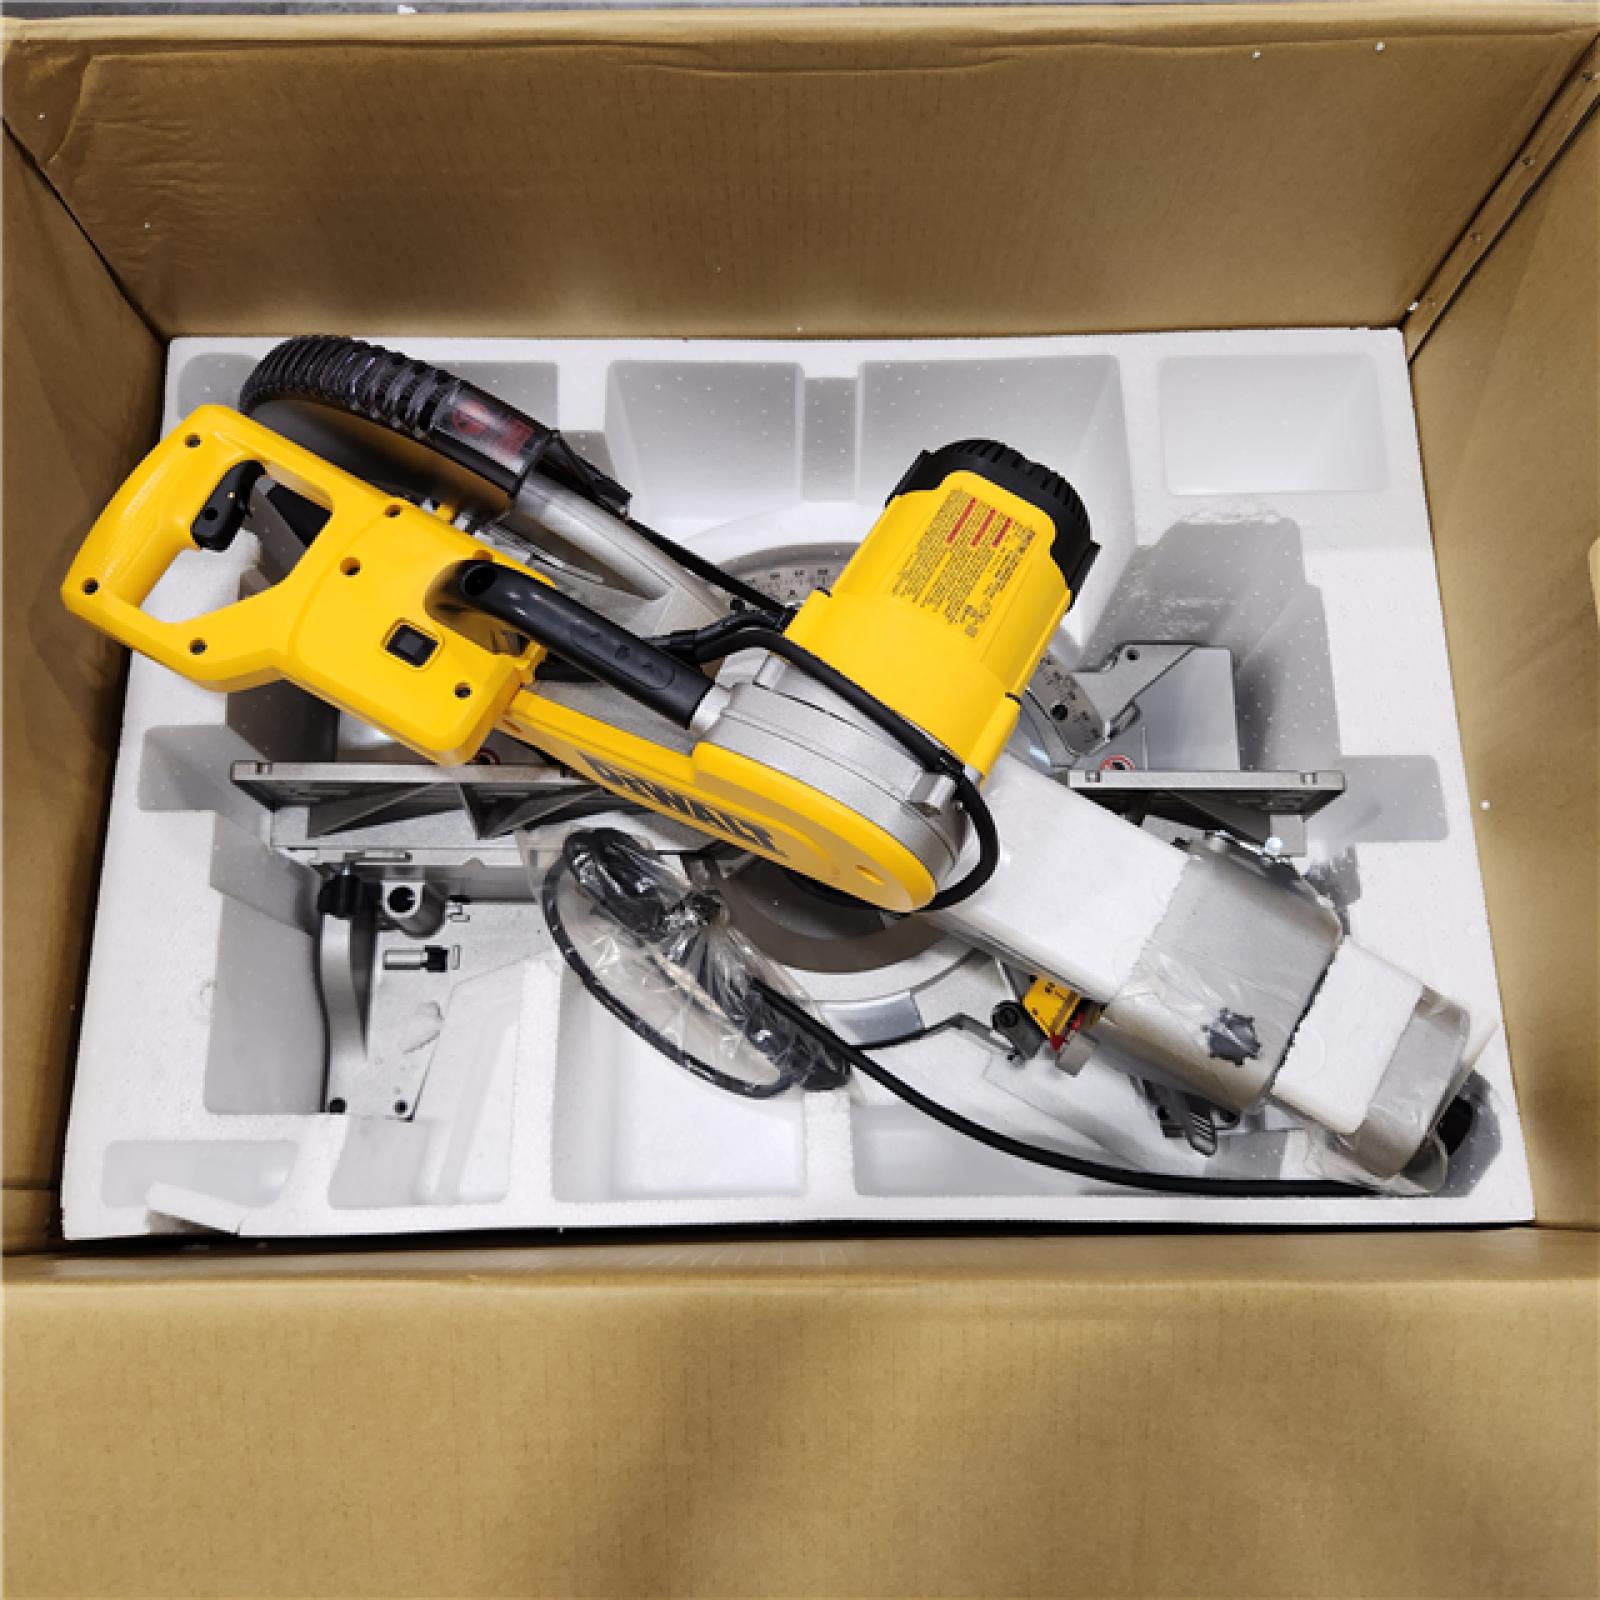 AS-IS DeWALT Camping Gear 12in Double Bevel Sliding Compound Miter Saw Yellow/Black Model: DWS780